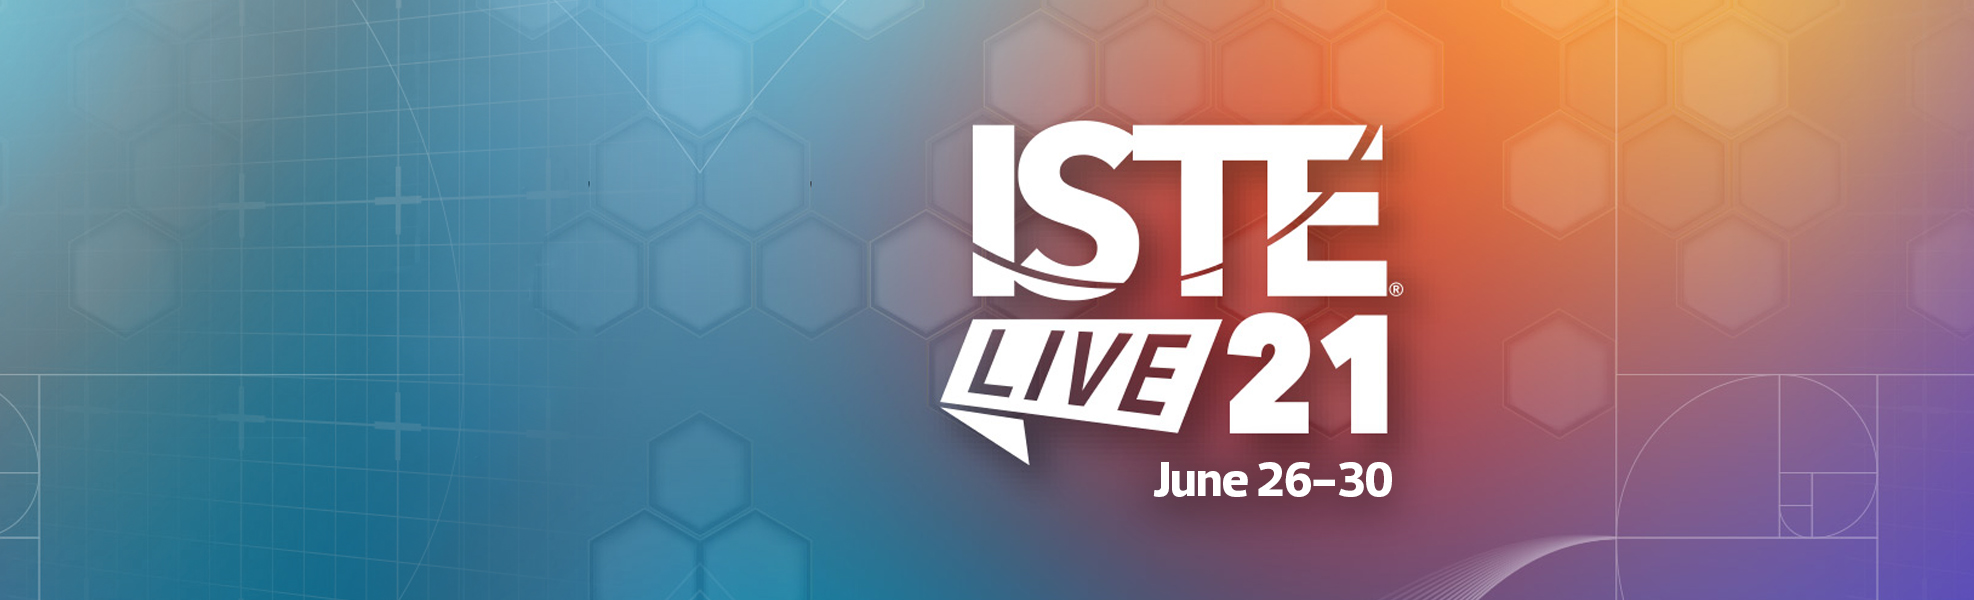 ISTELive 21 banner